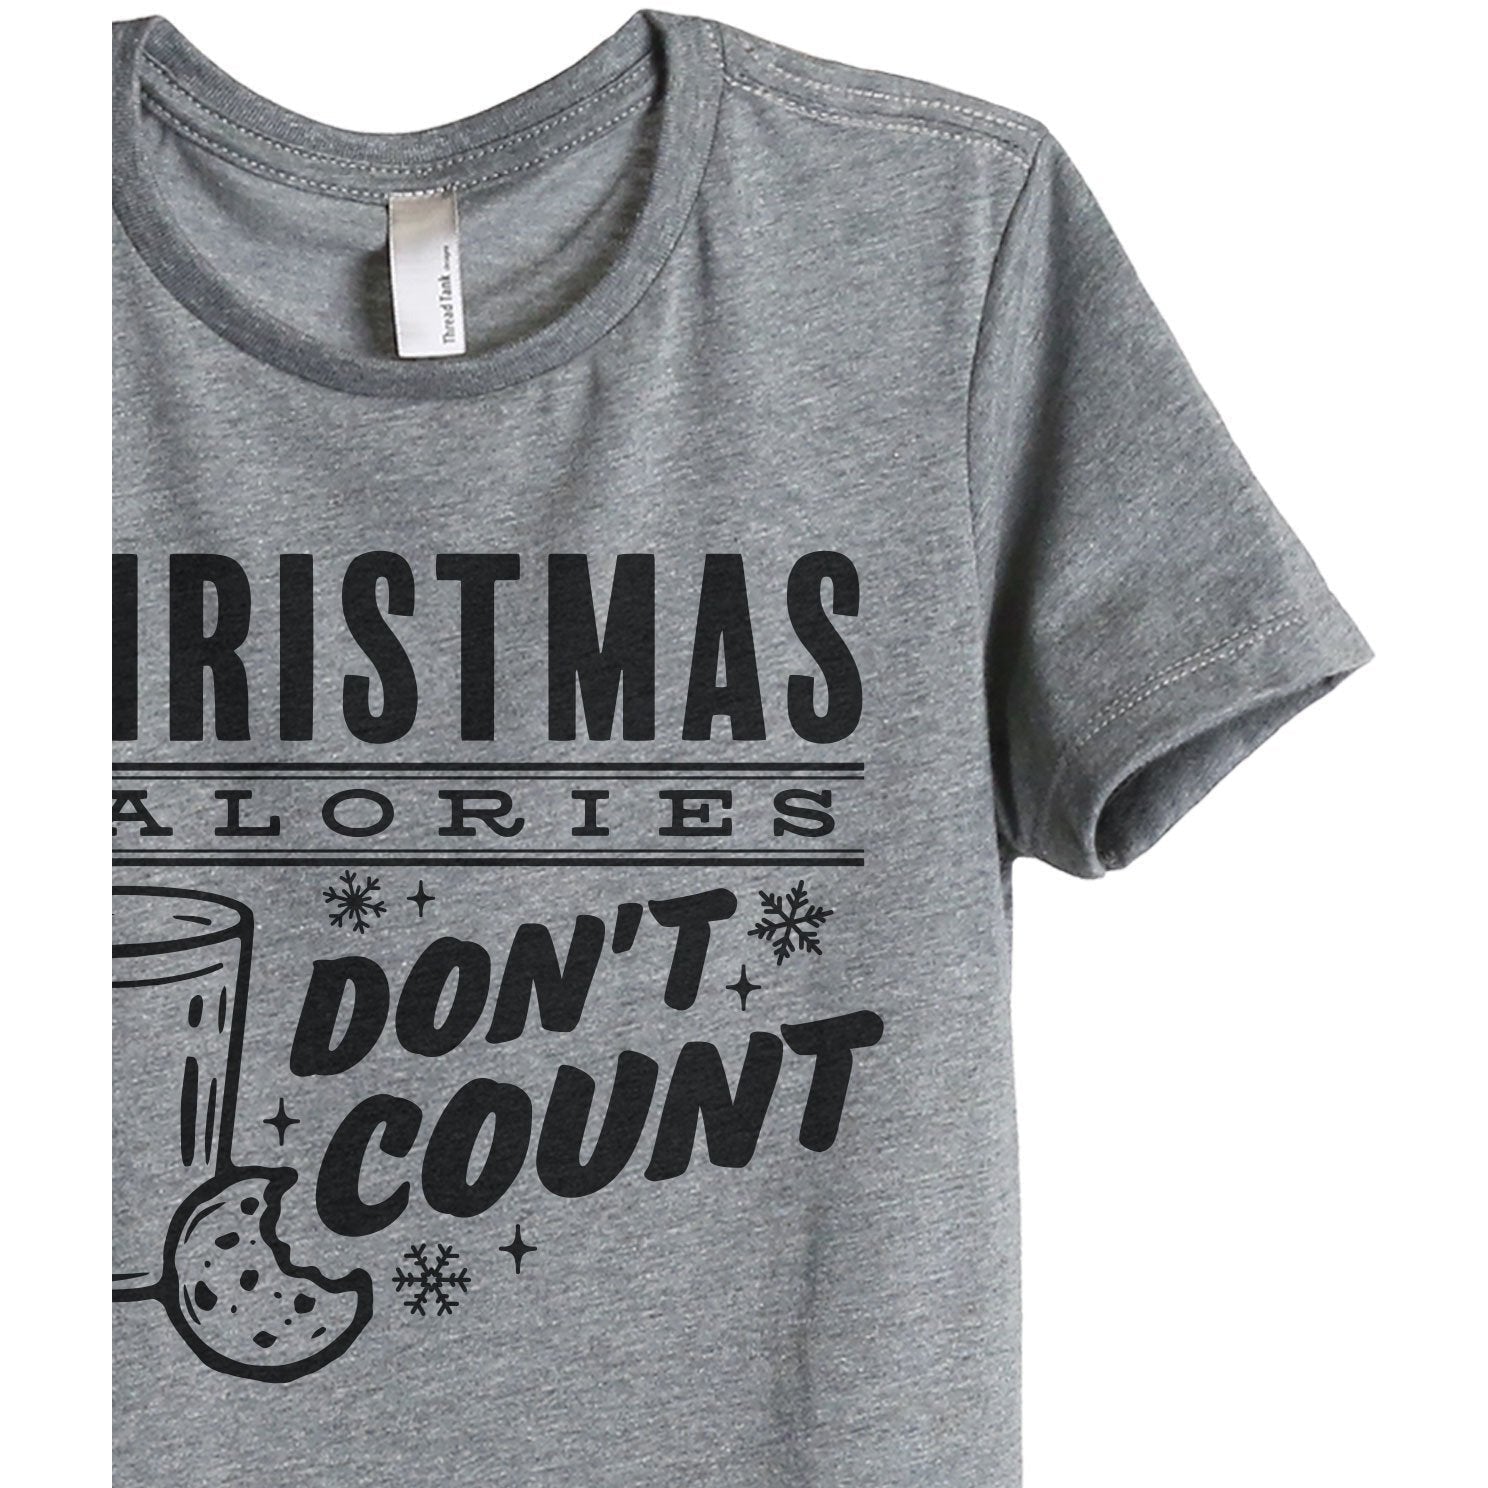 Christmas Calories Don't Count Women's Relaxed Crewneck T-Shirt Top Tee Heather Grey Zoom Details
